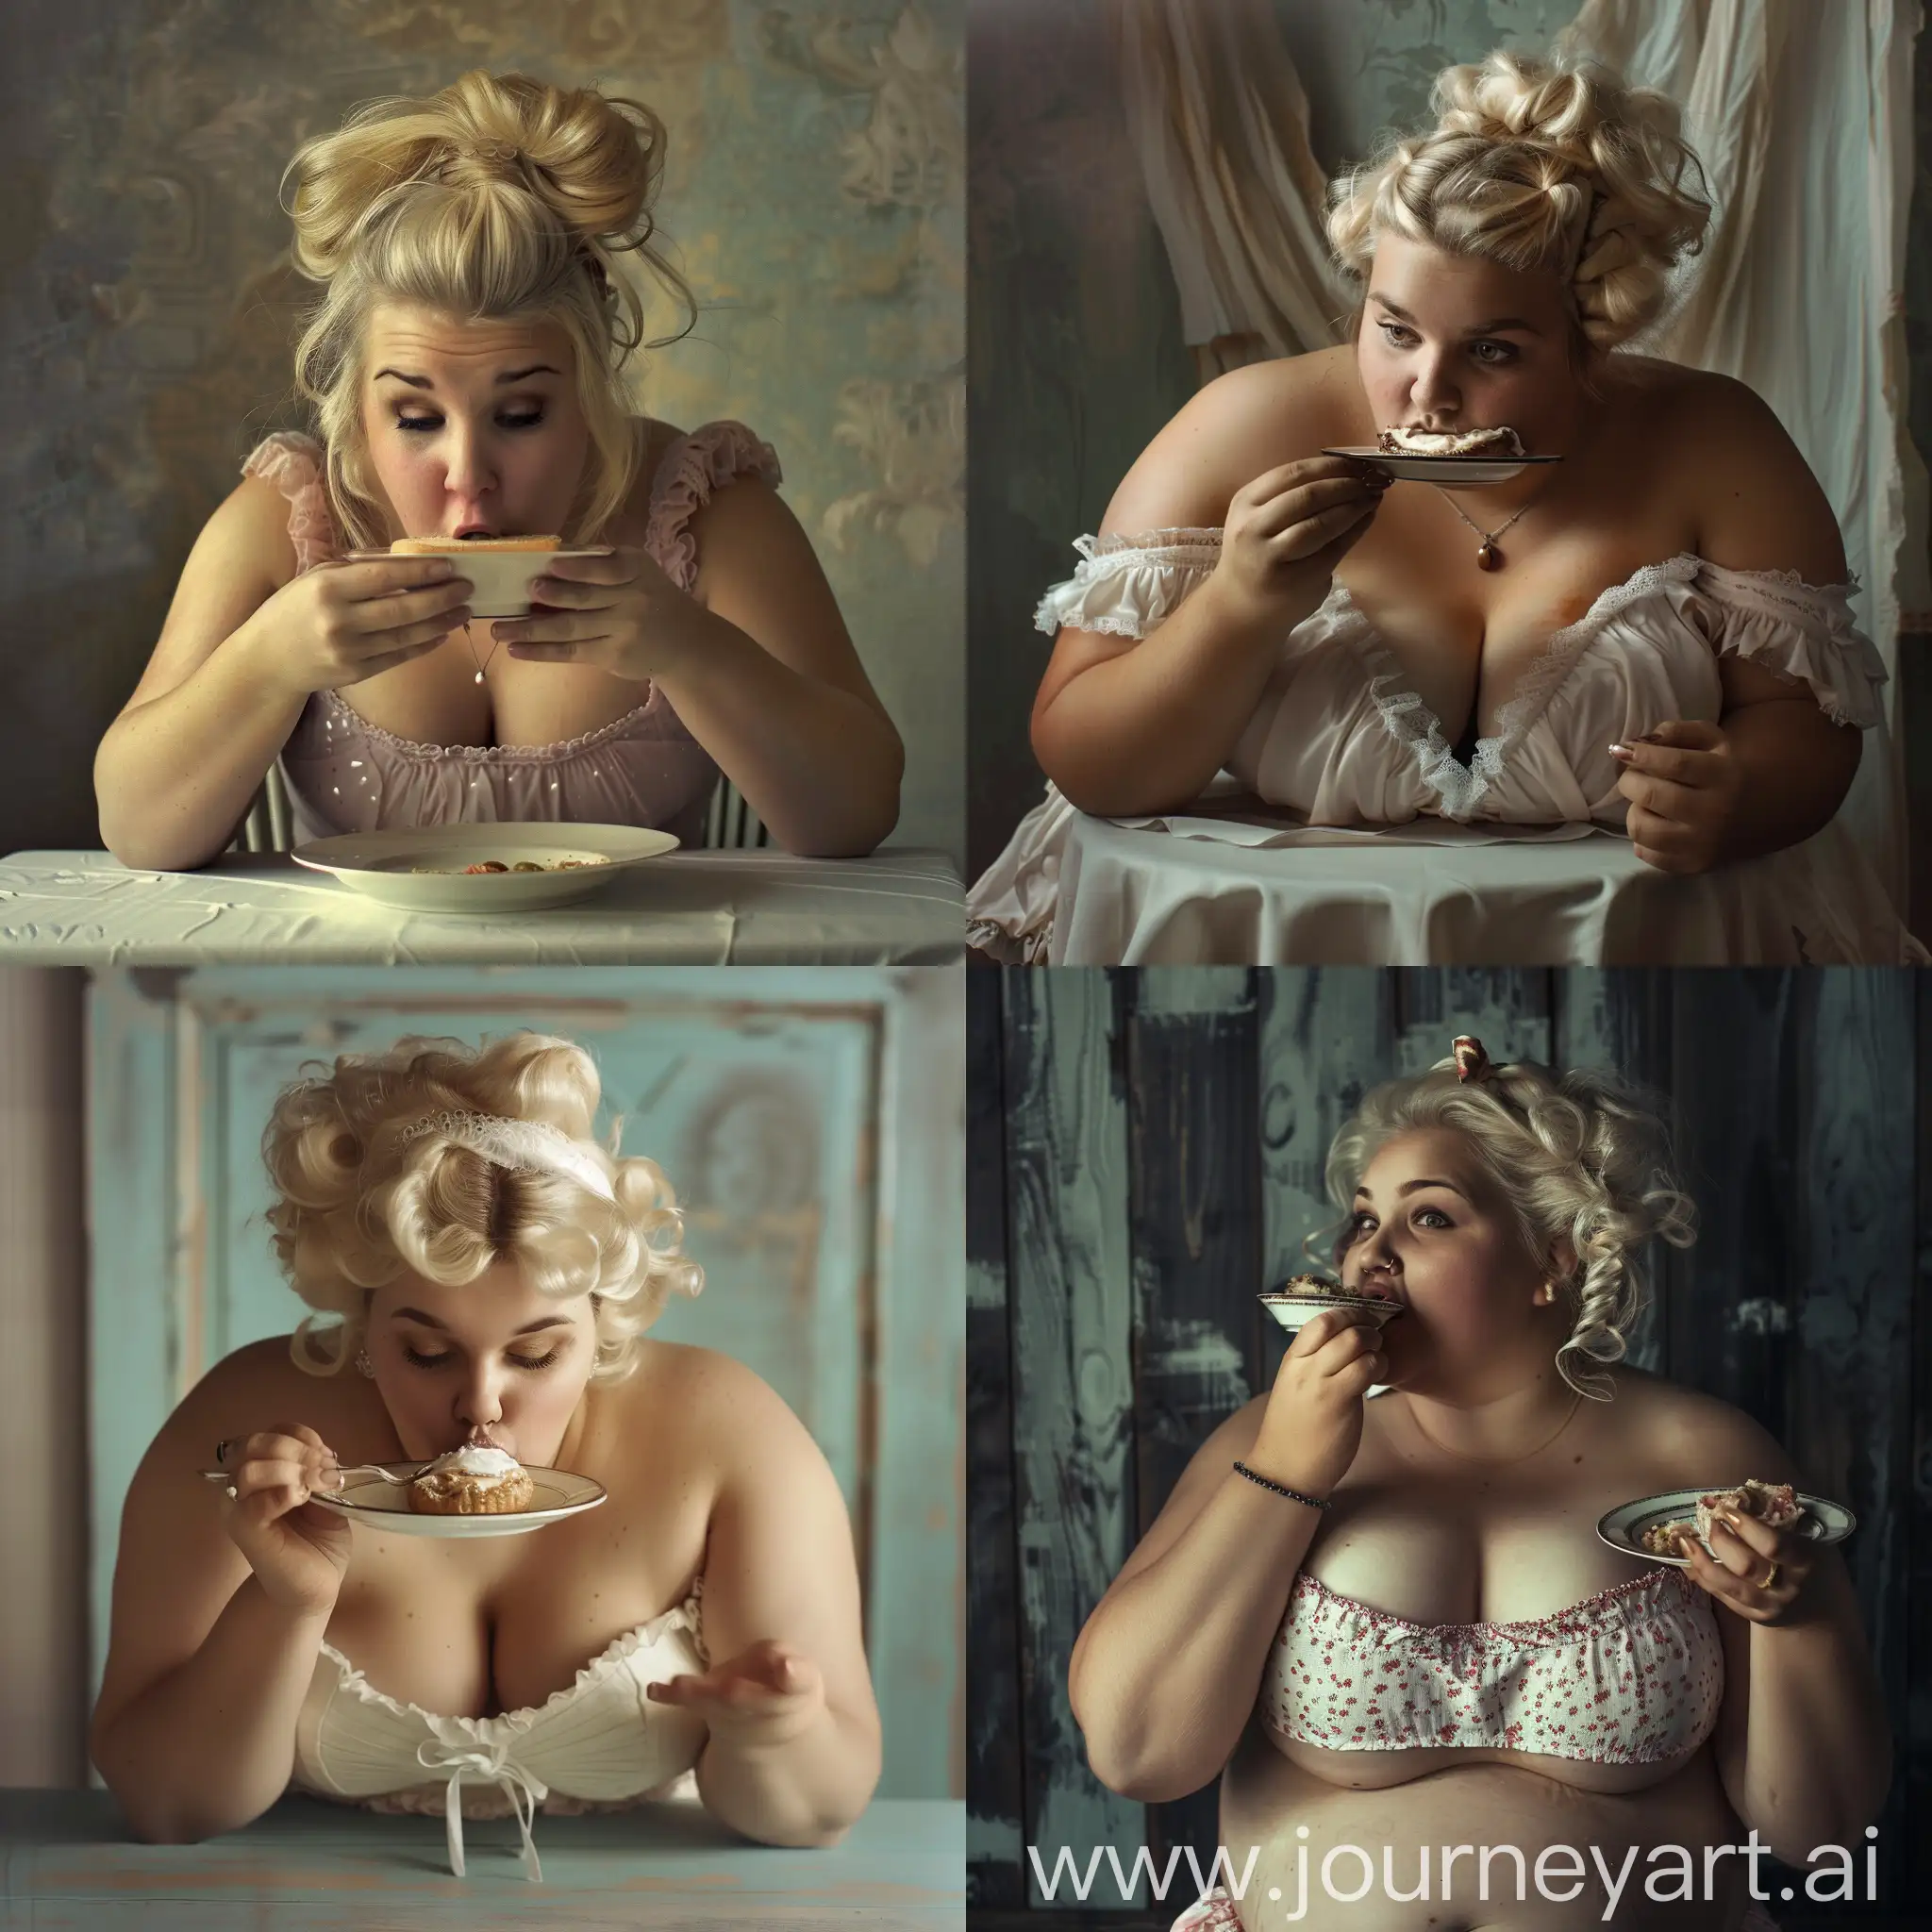 fat blonde woman with a chignon eating off a plate directly with its mouth